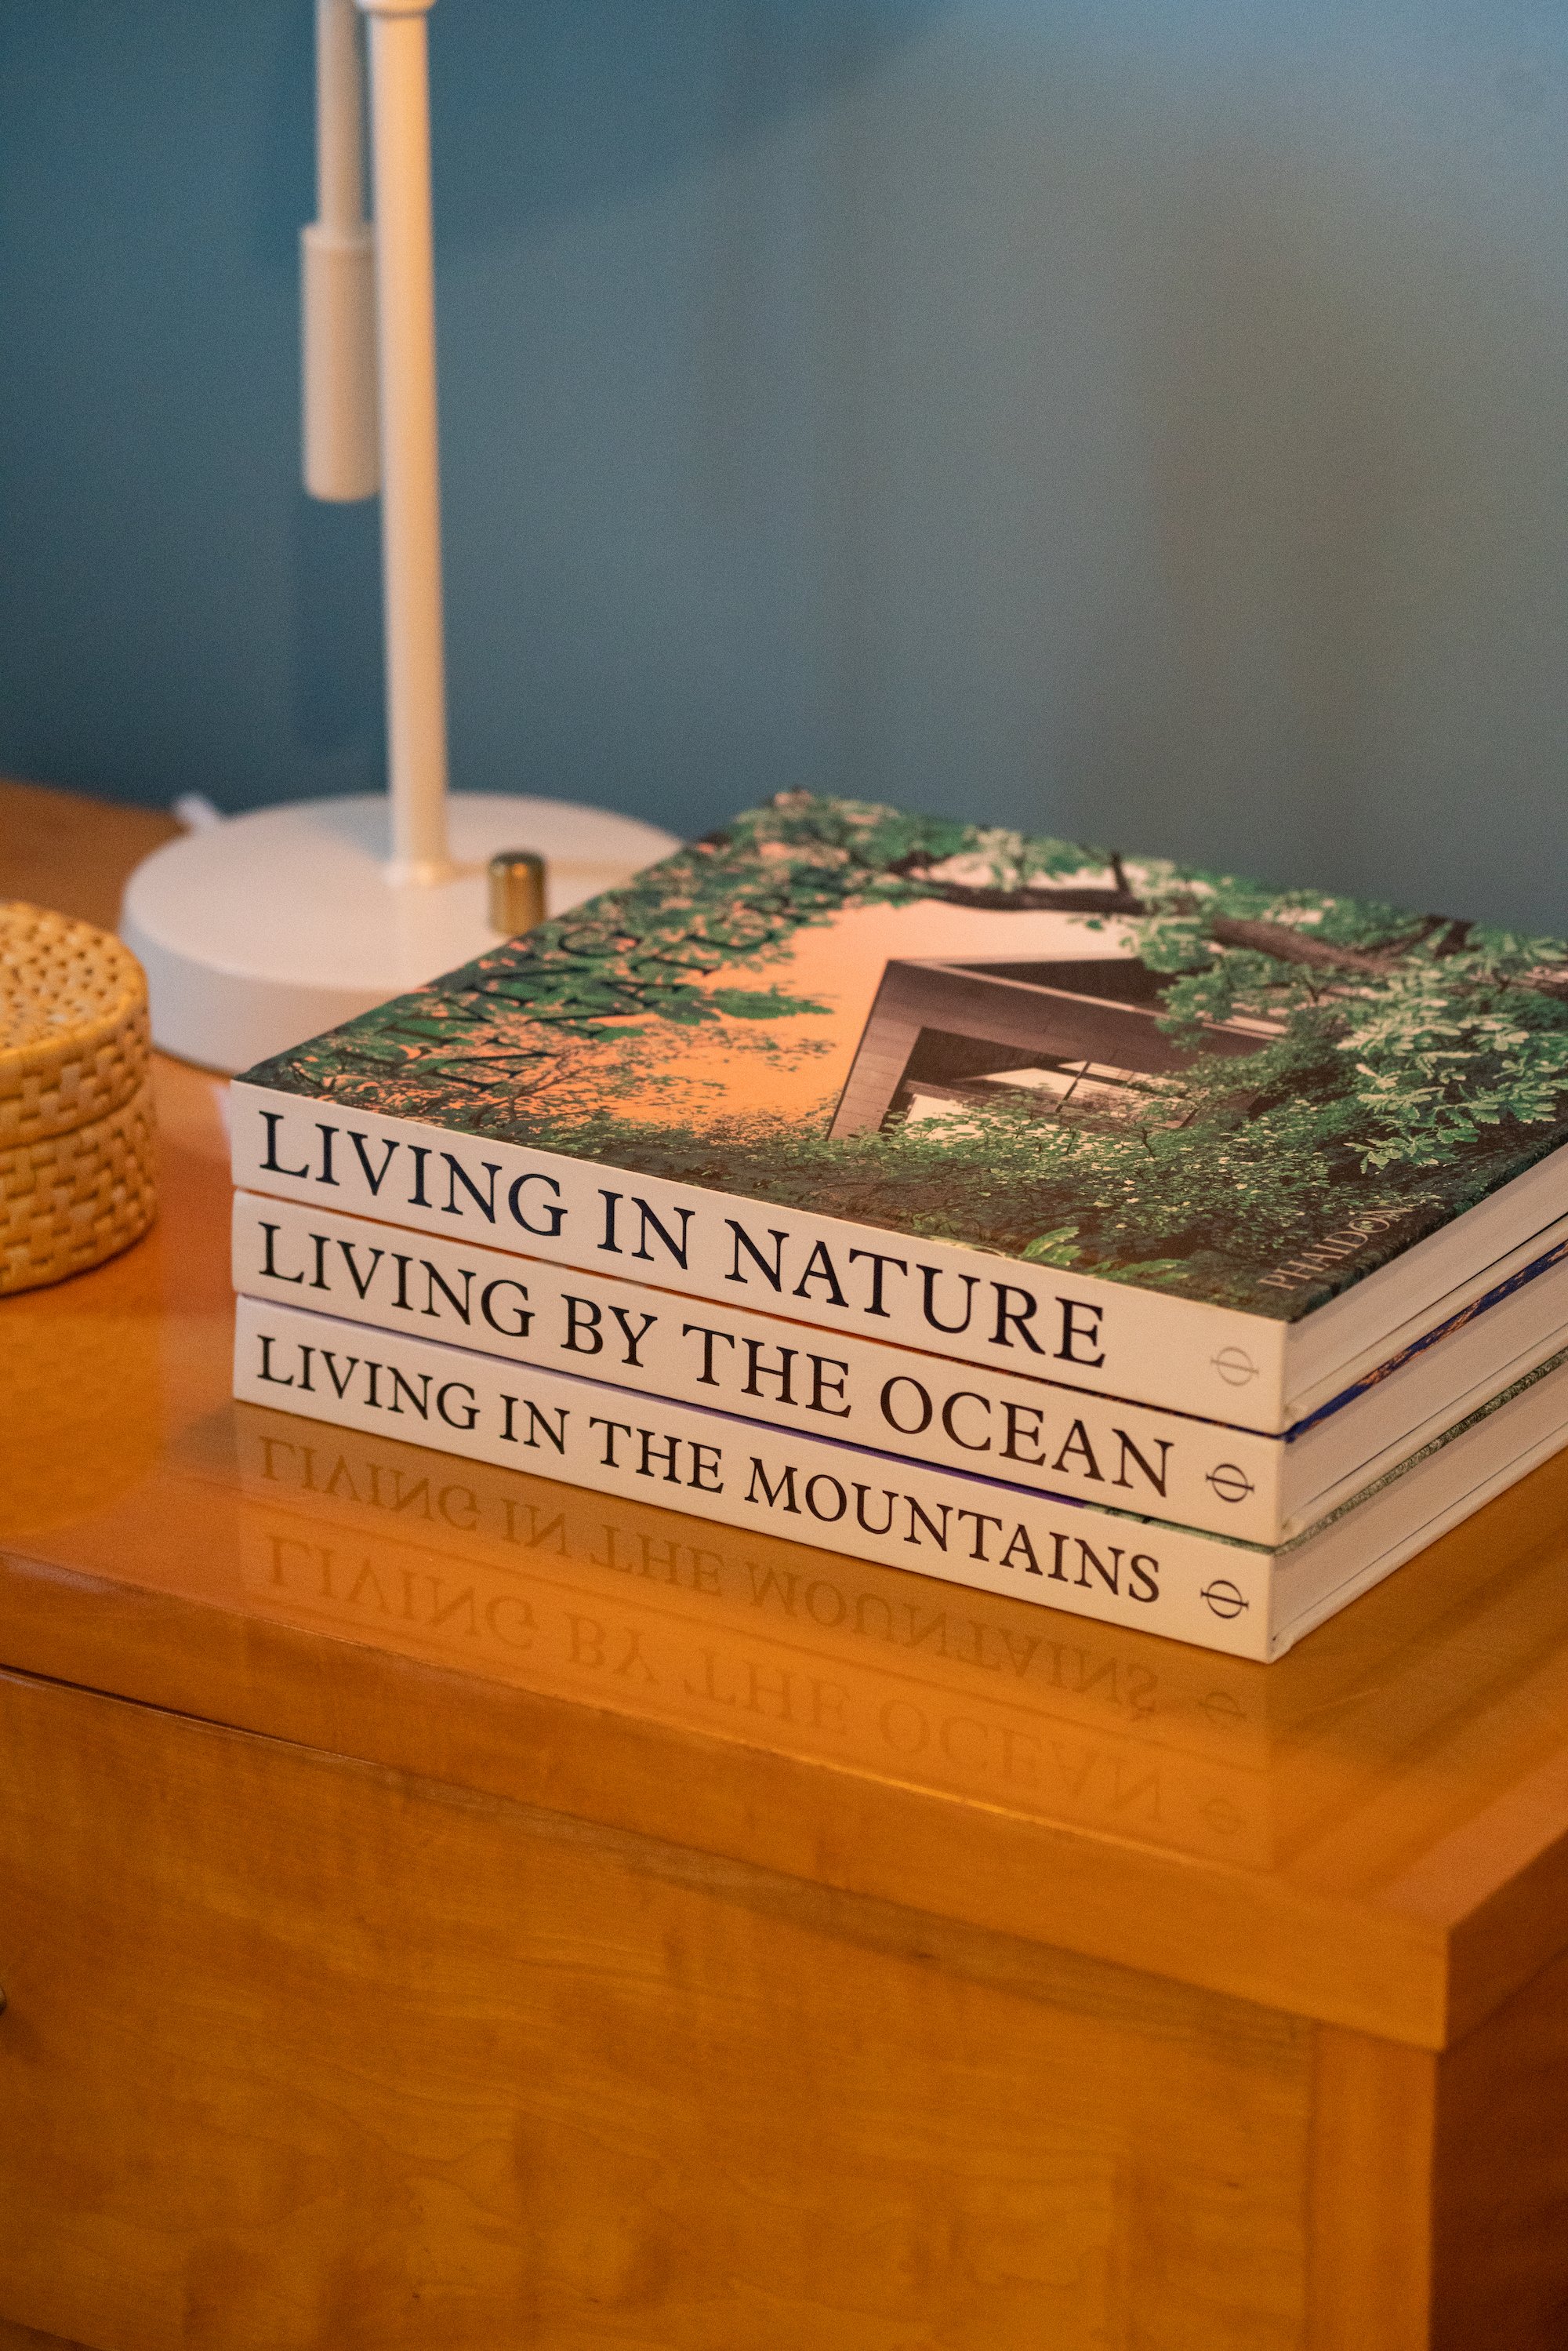 living in nature living by the mountains living by the ocean phaidon.jpg